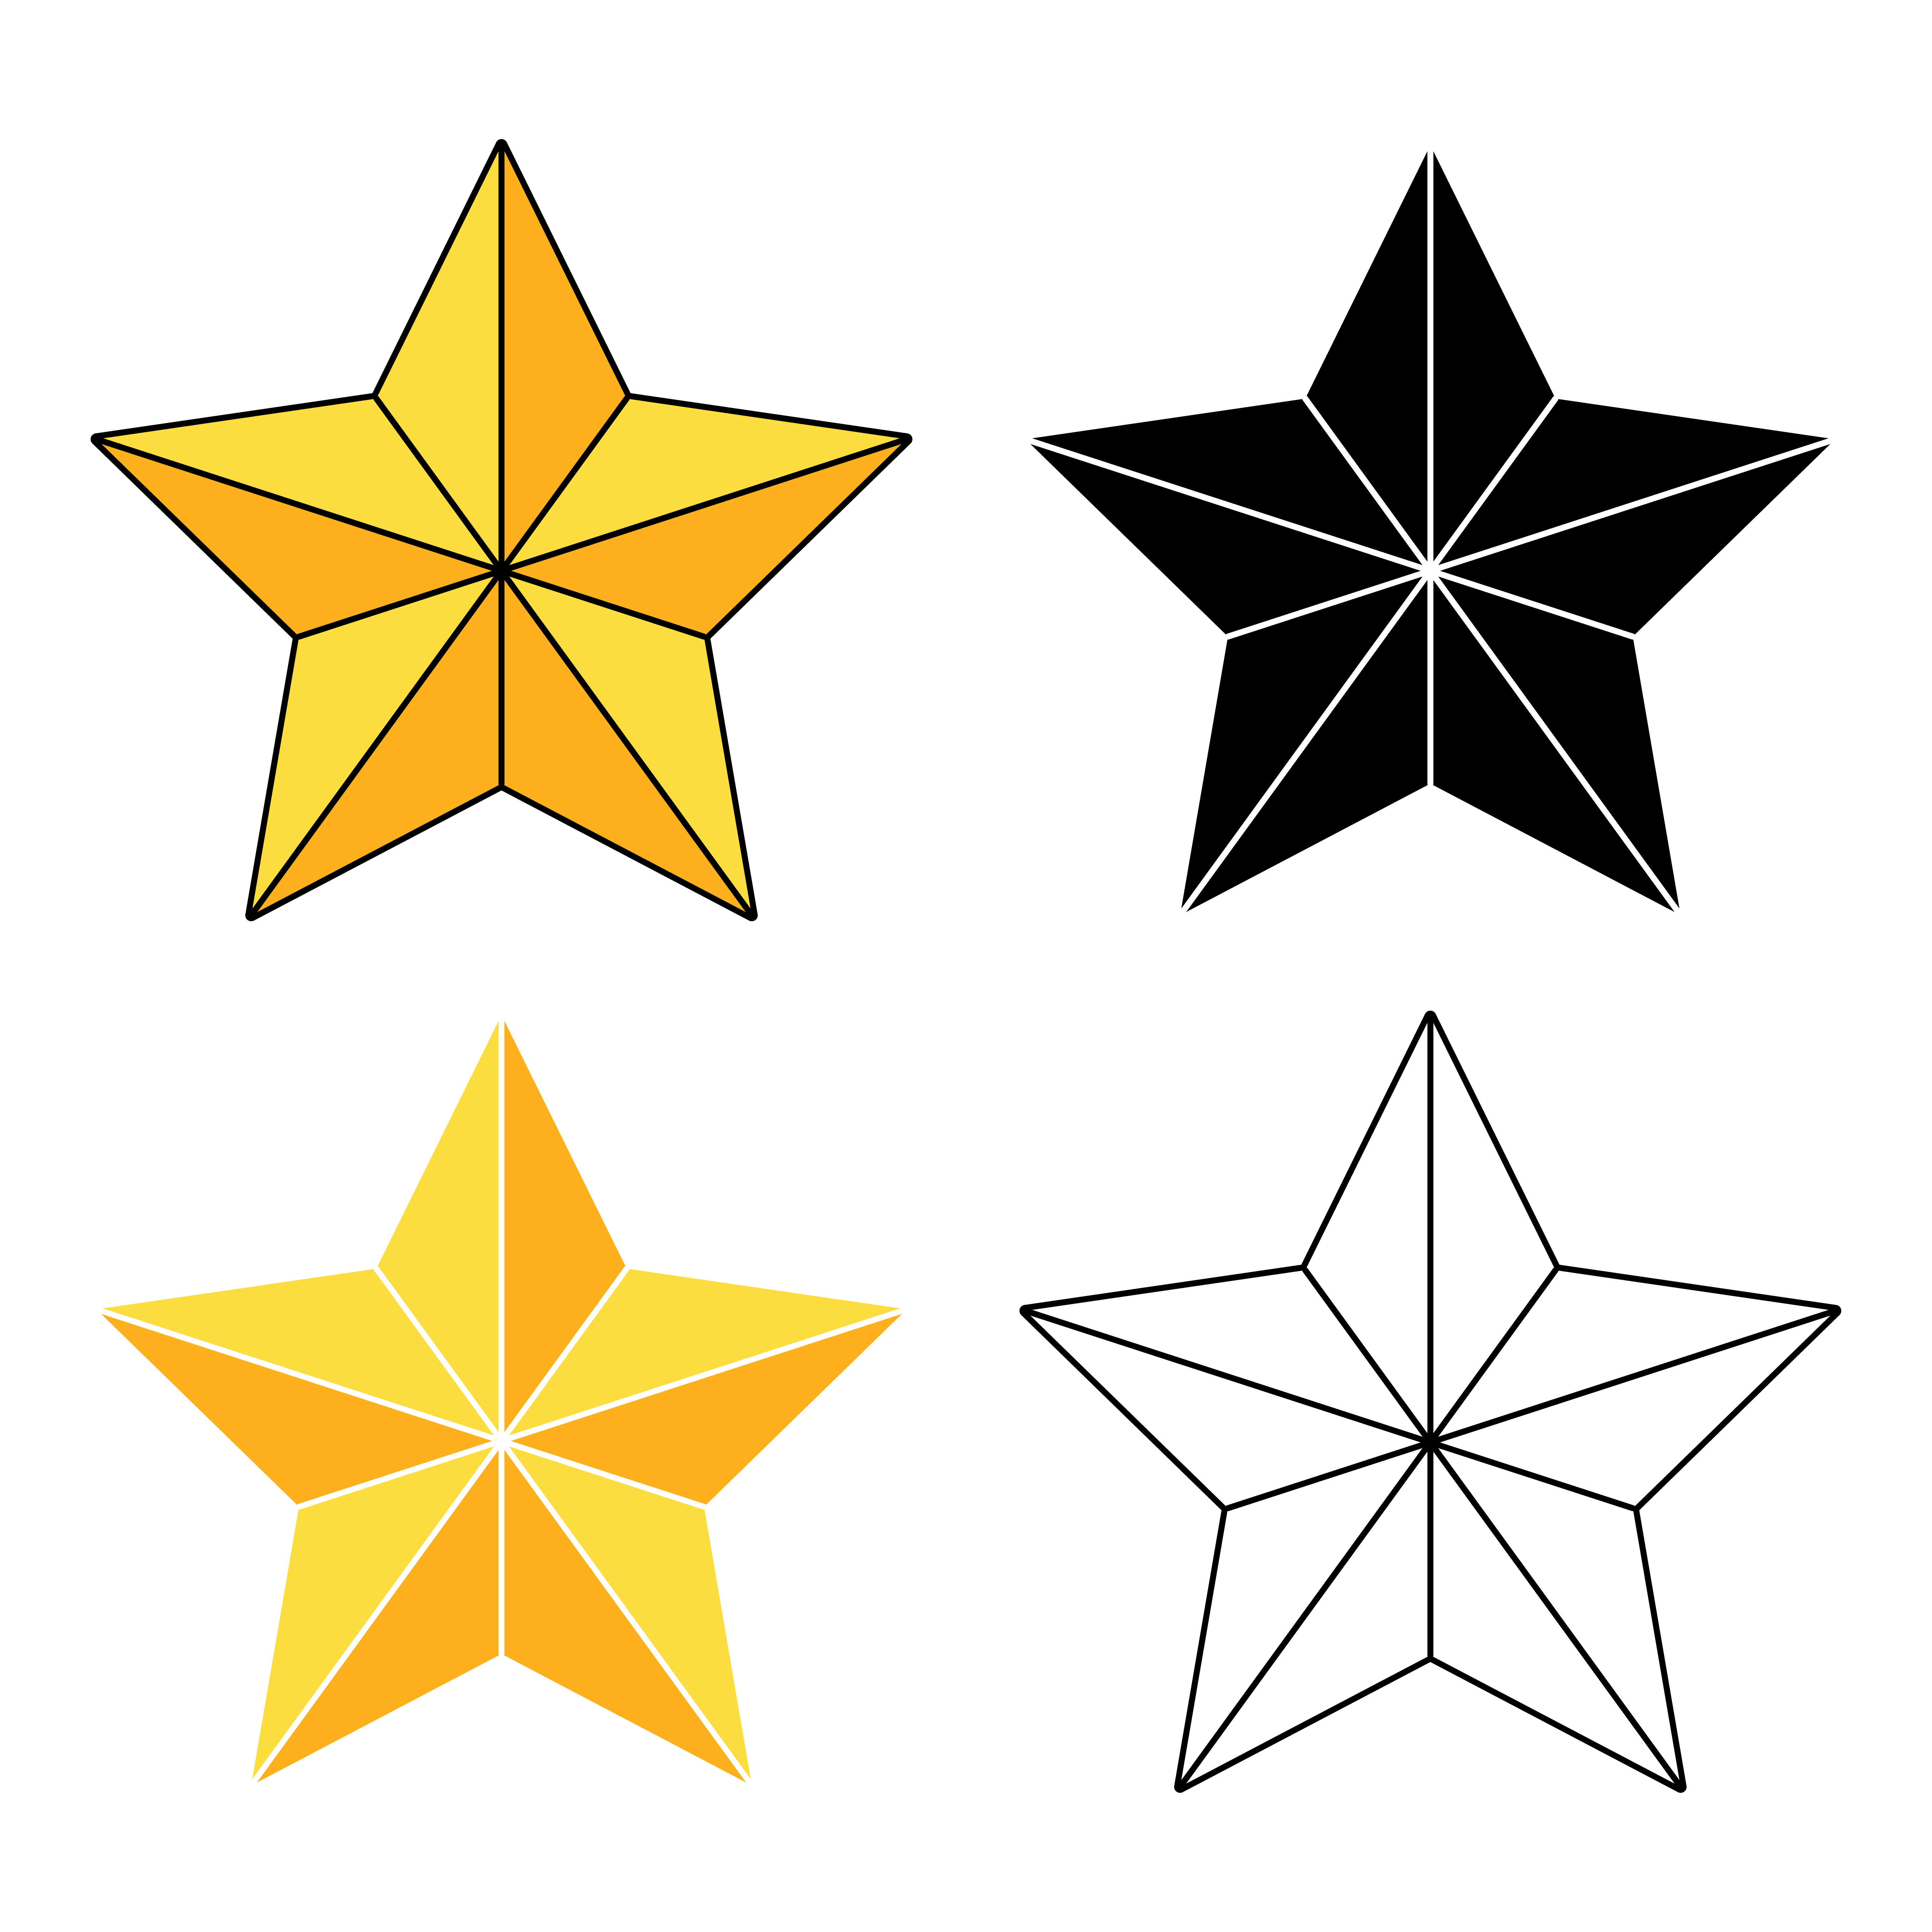 Golden star icon set isolated on white background. Gold holiday light. Collection of Christmas Vector ornament. Illustration of  christian symbol. Silhouette,outline and yellow design.